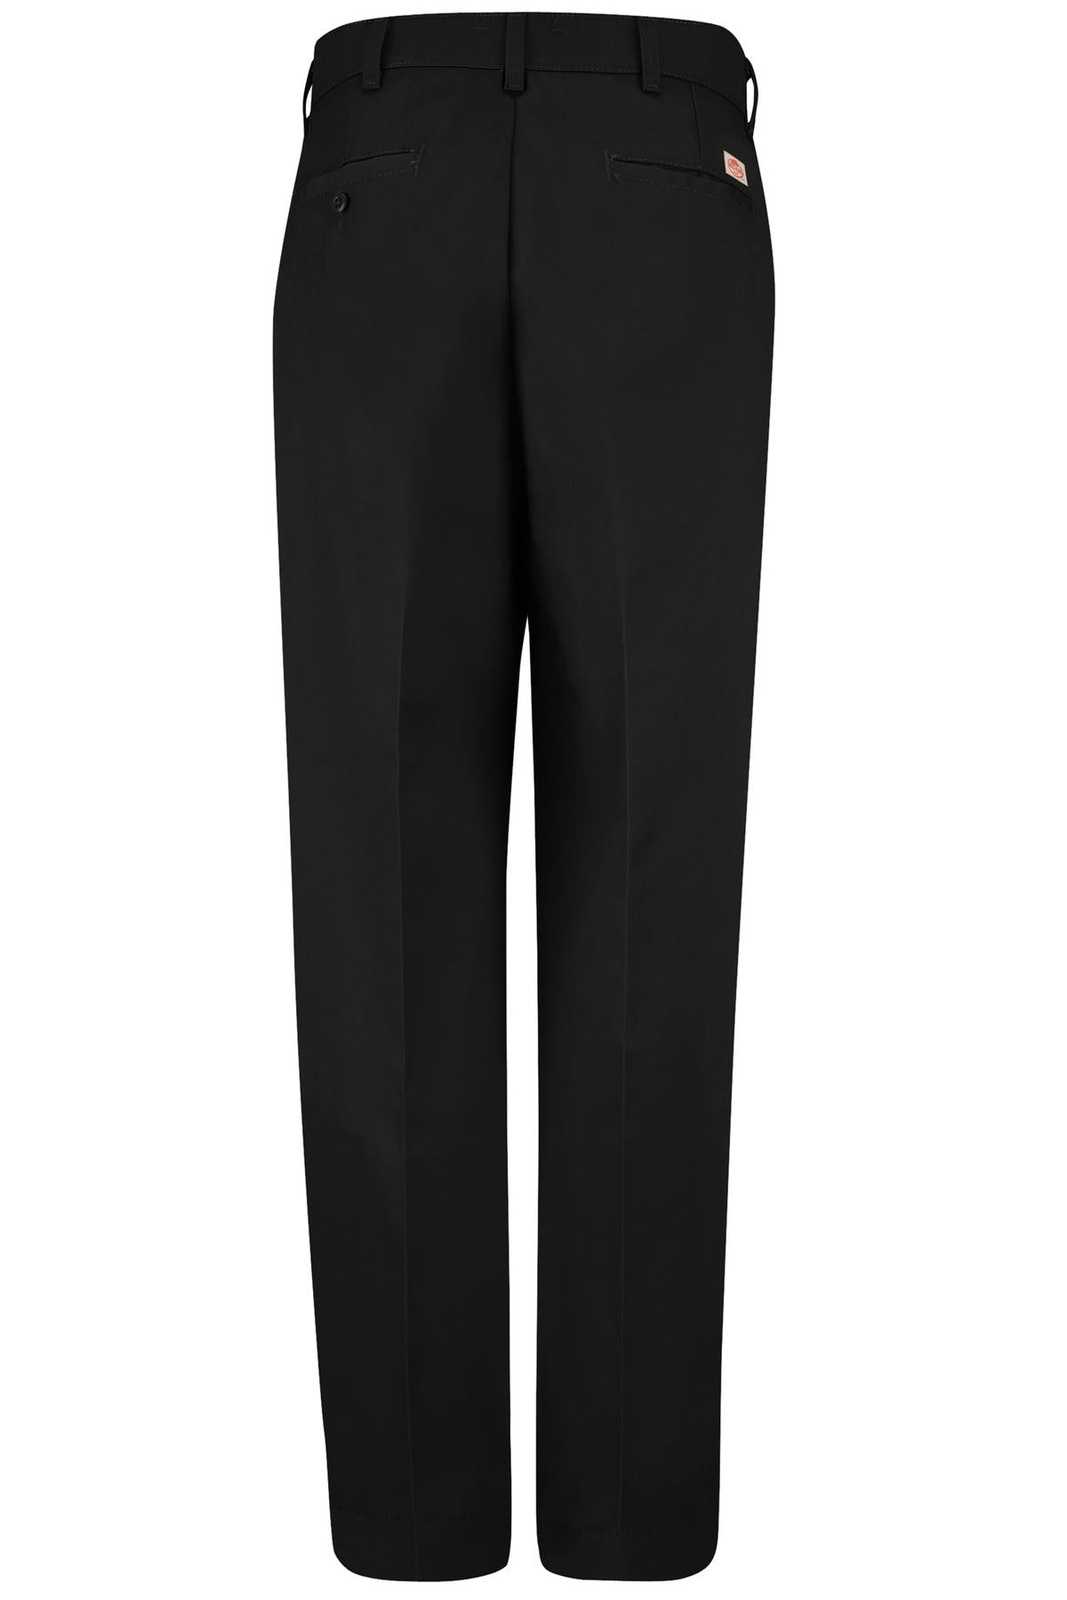 Red Kap PT20 Industrial Work Pant - Black - HIT a Double - 3